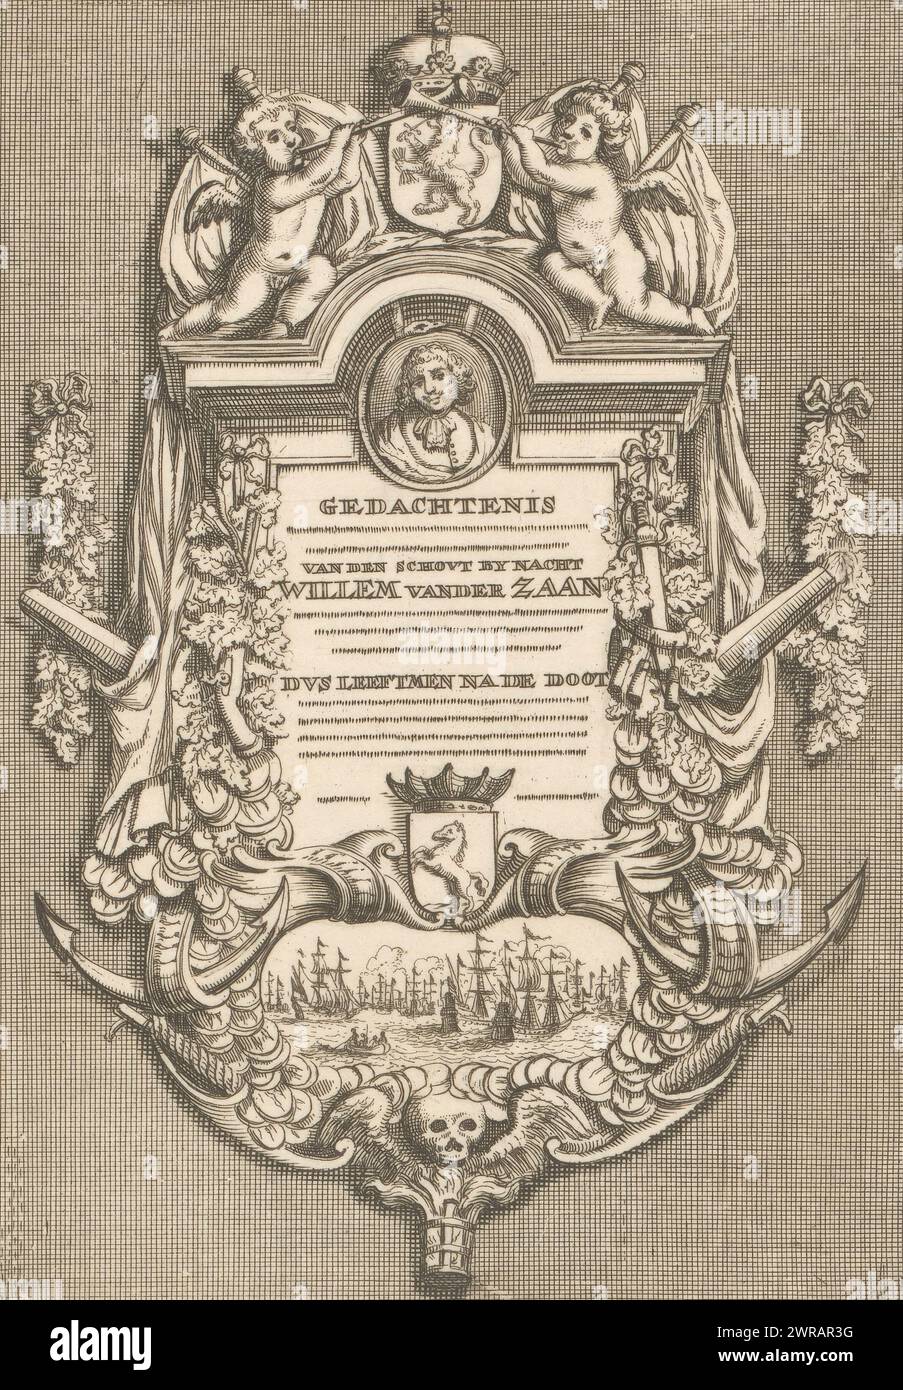 Grave marker for Willem van der Zaan in the Oude Kerk in Amsterdam, print maker: anonymous, after sculpture by: Rombout Verhulst, Northern Netherlands, 1690, paper, etching, engraving, height 178 mm × width 128 mm, print Stock Photo